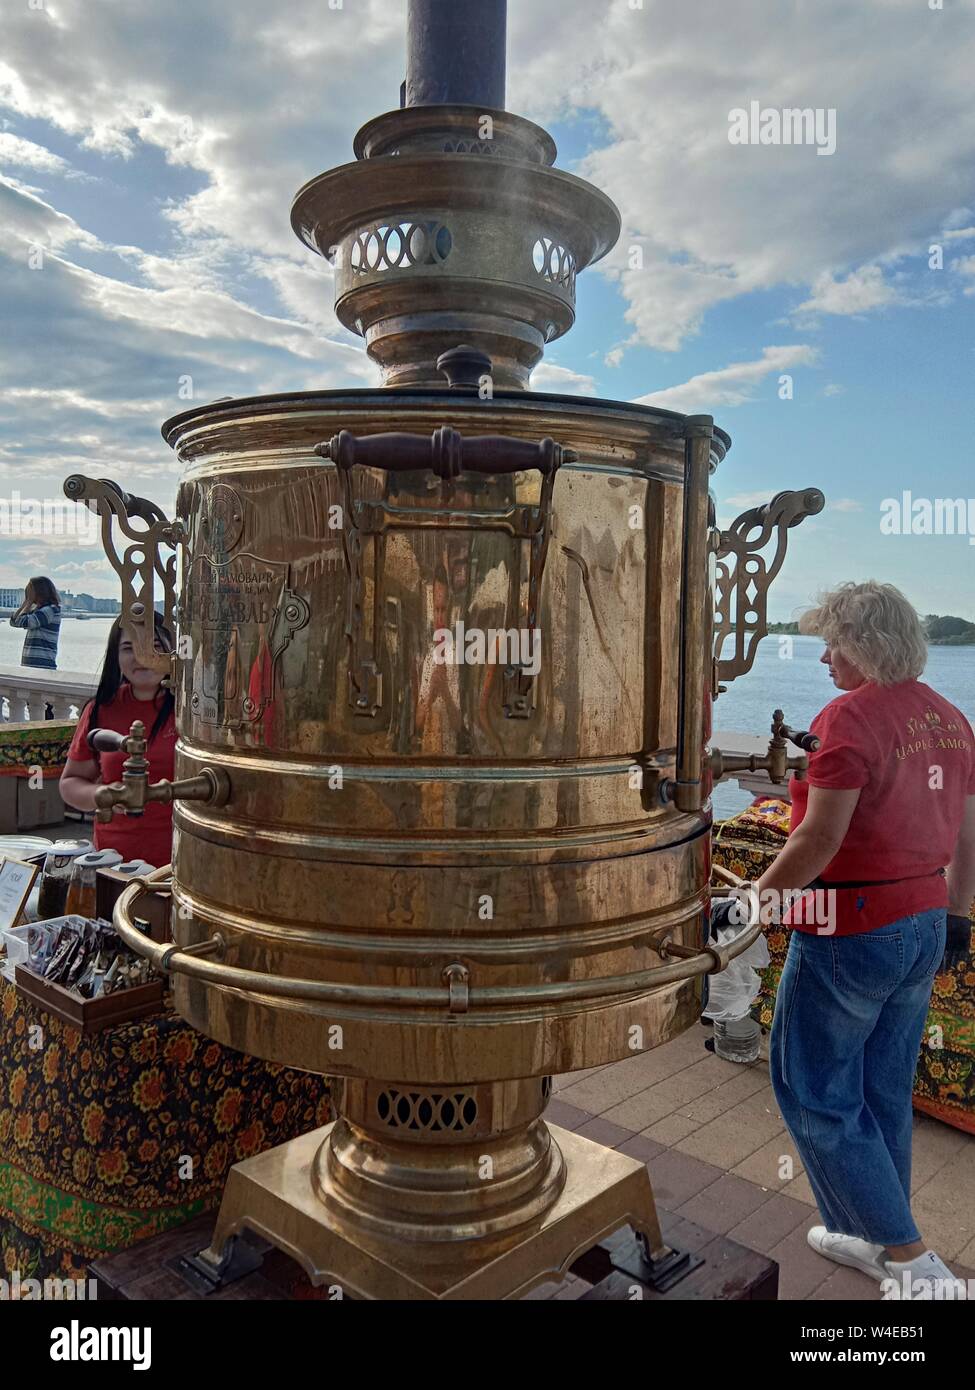 .Big samovar. A device for boiling water with wood. Big samovar. A device for boiling water with wood. Russia. Stock Photo